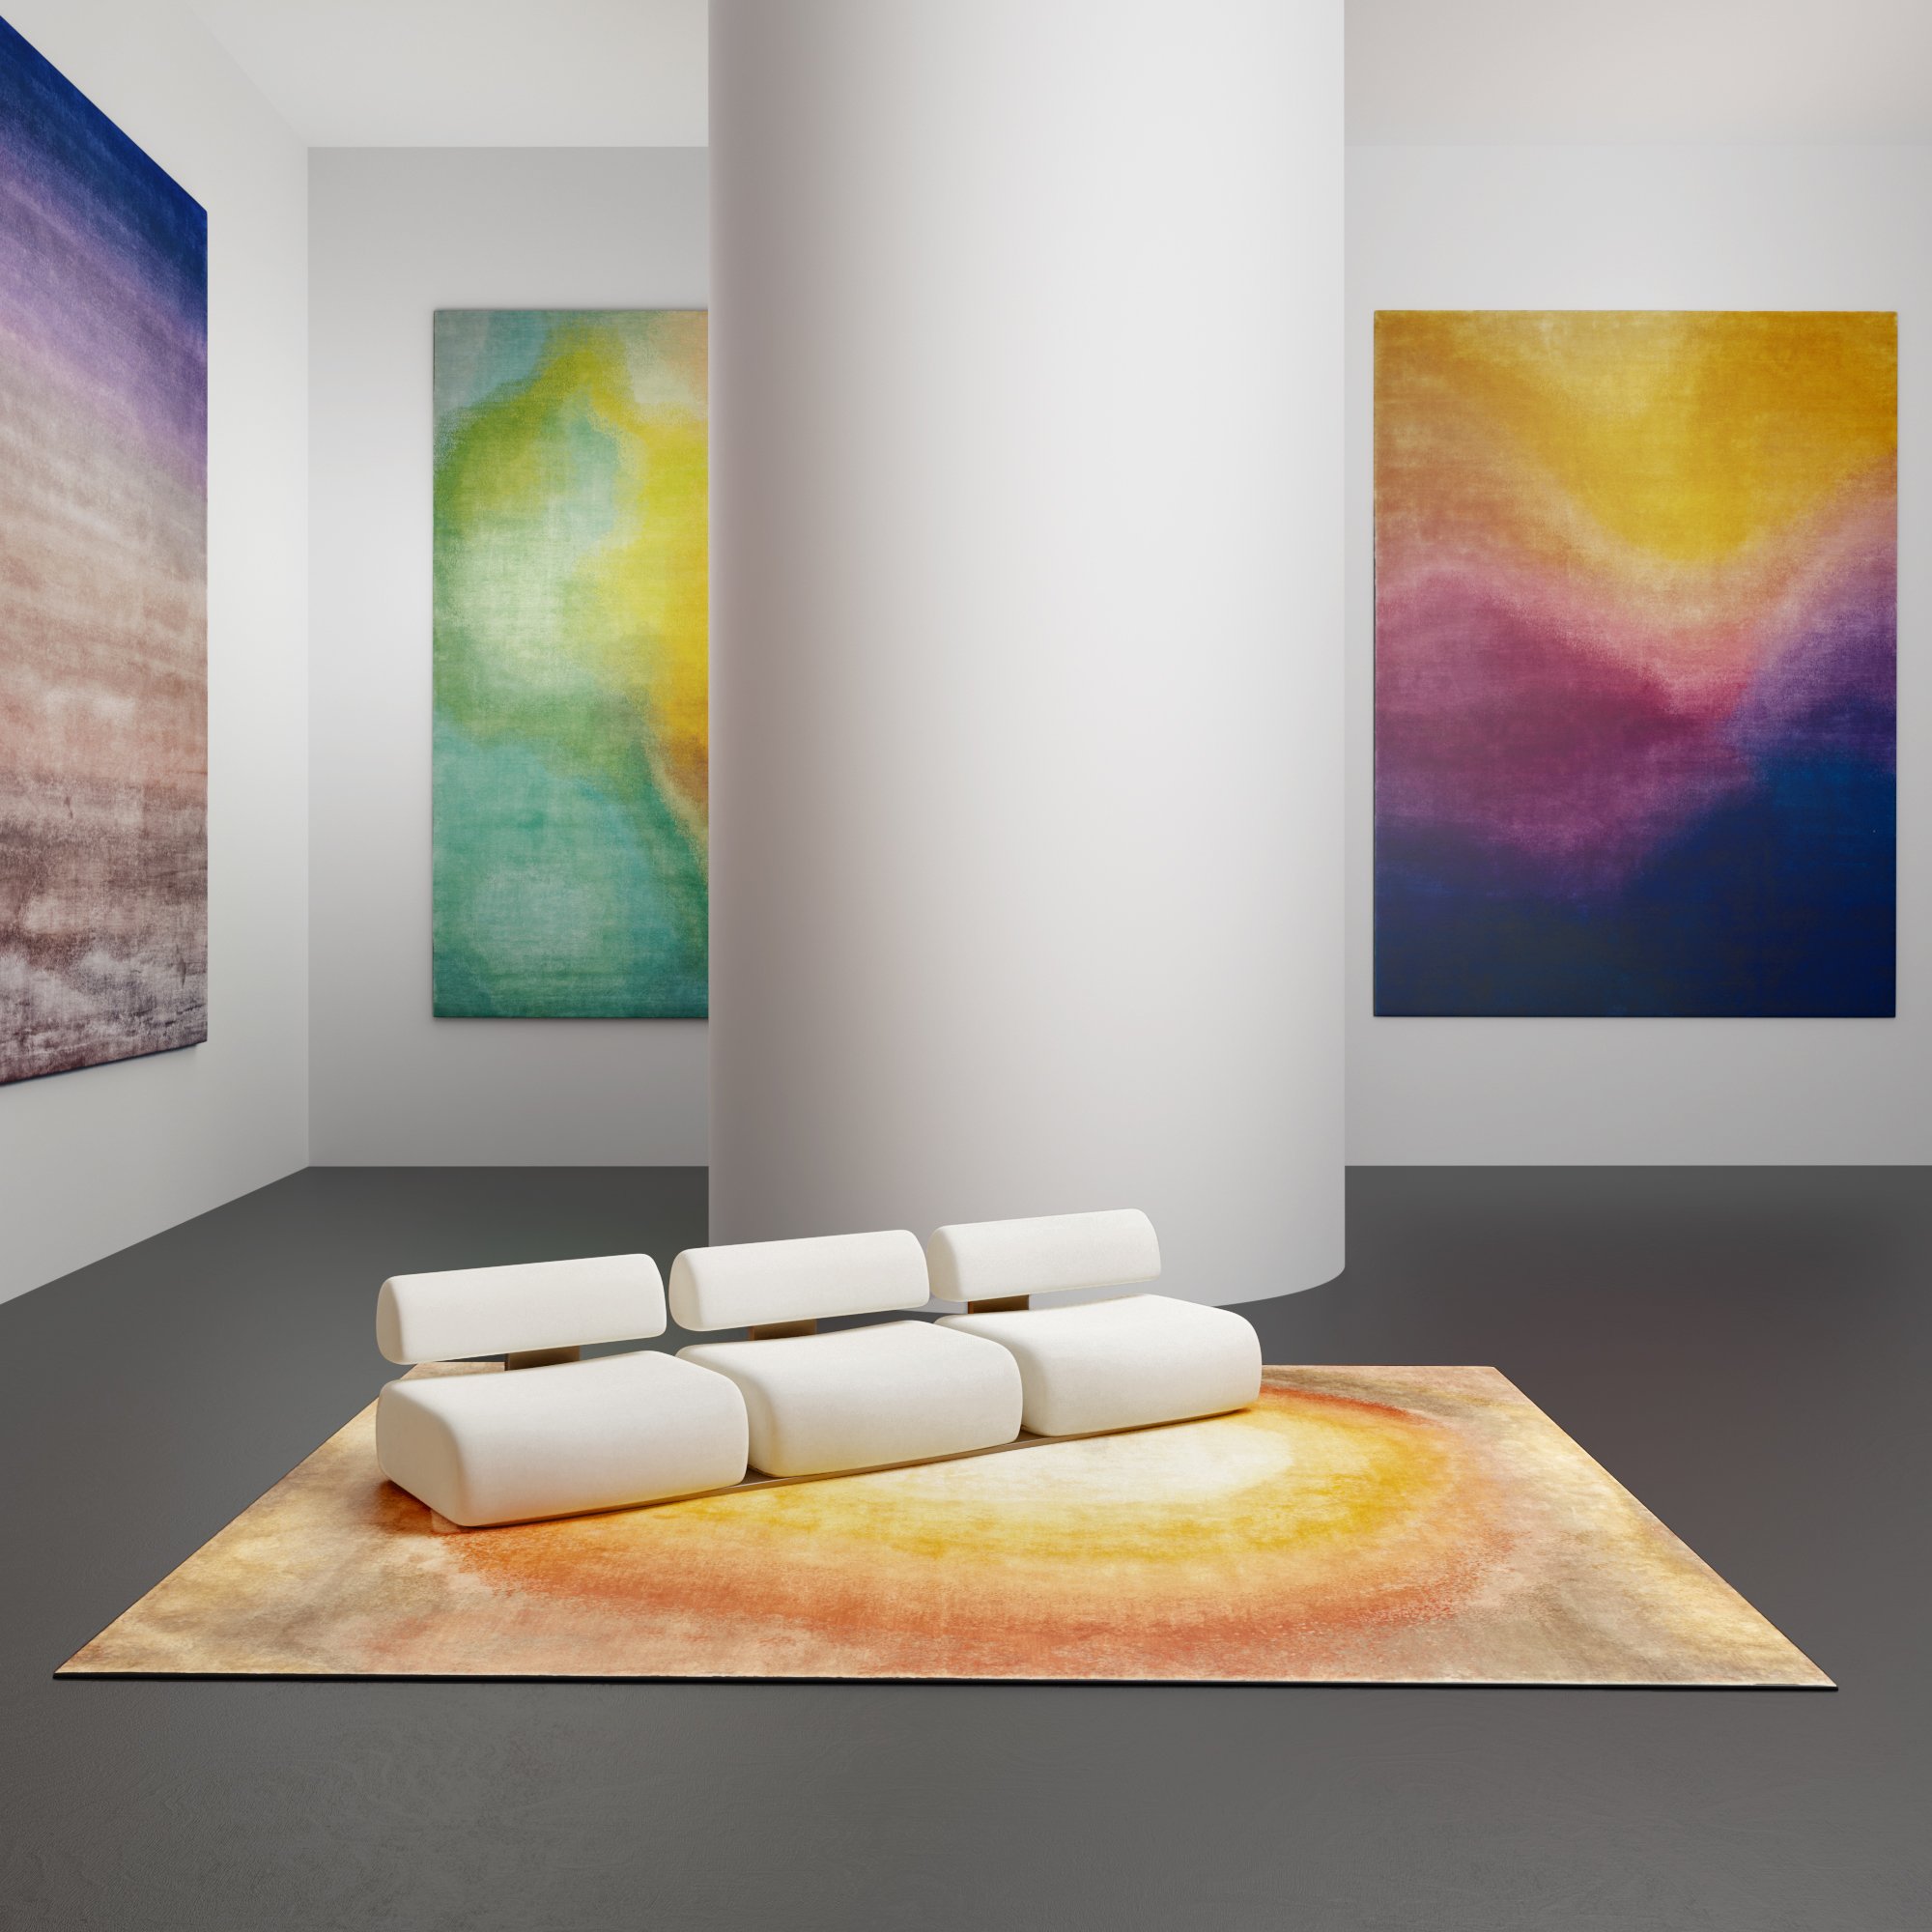 Galerie SORS. SPECTRUM collection by Jan Kath